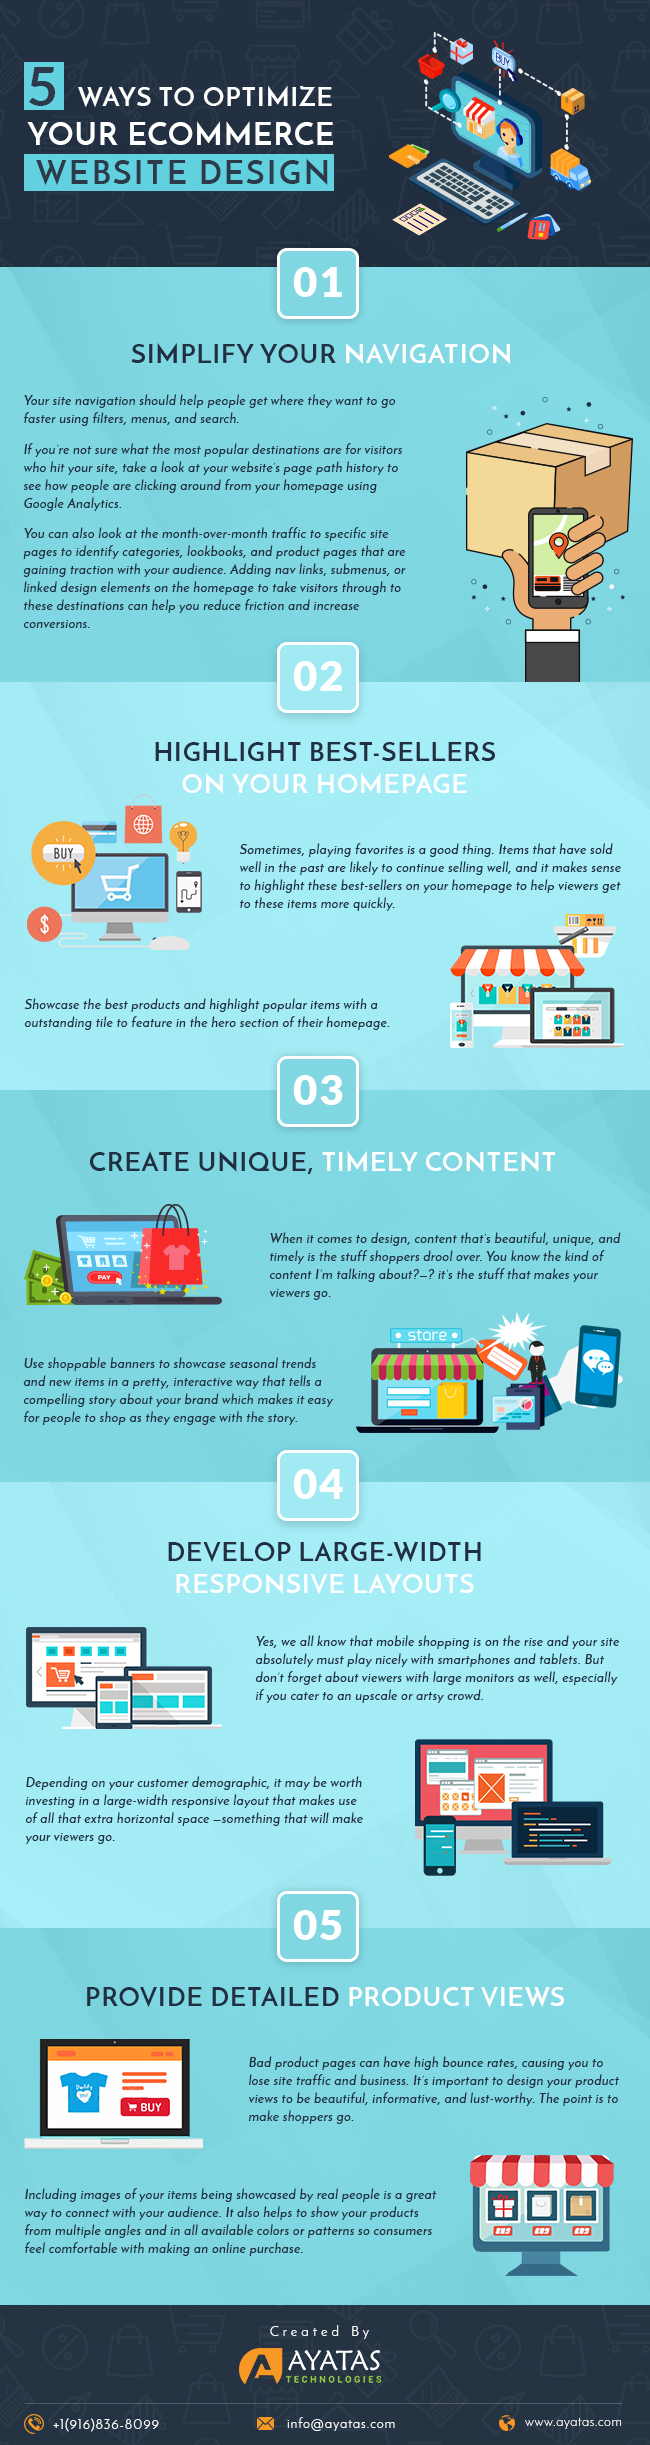 5-Simple-Ways-to-Optimize-your-eCommerce-Website-Design-Infographic-plaza